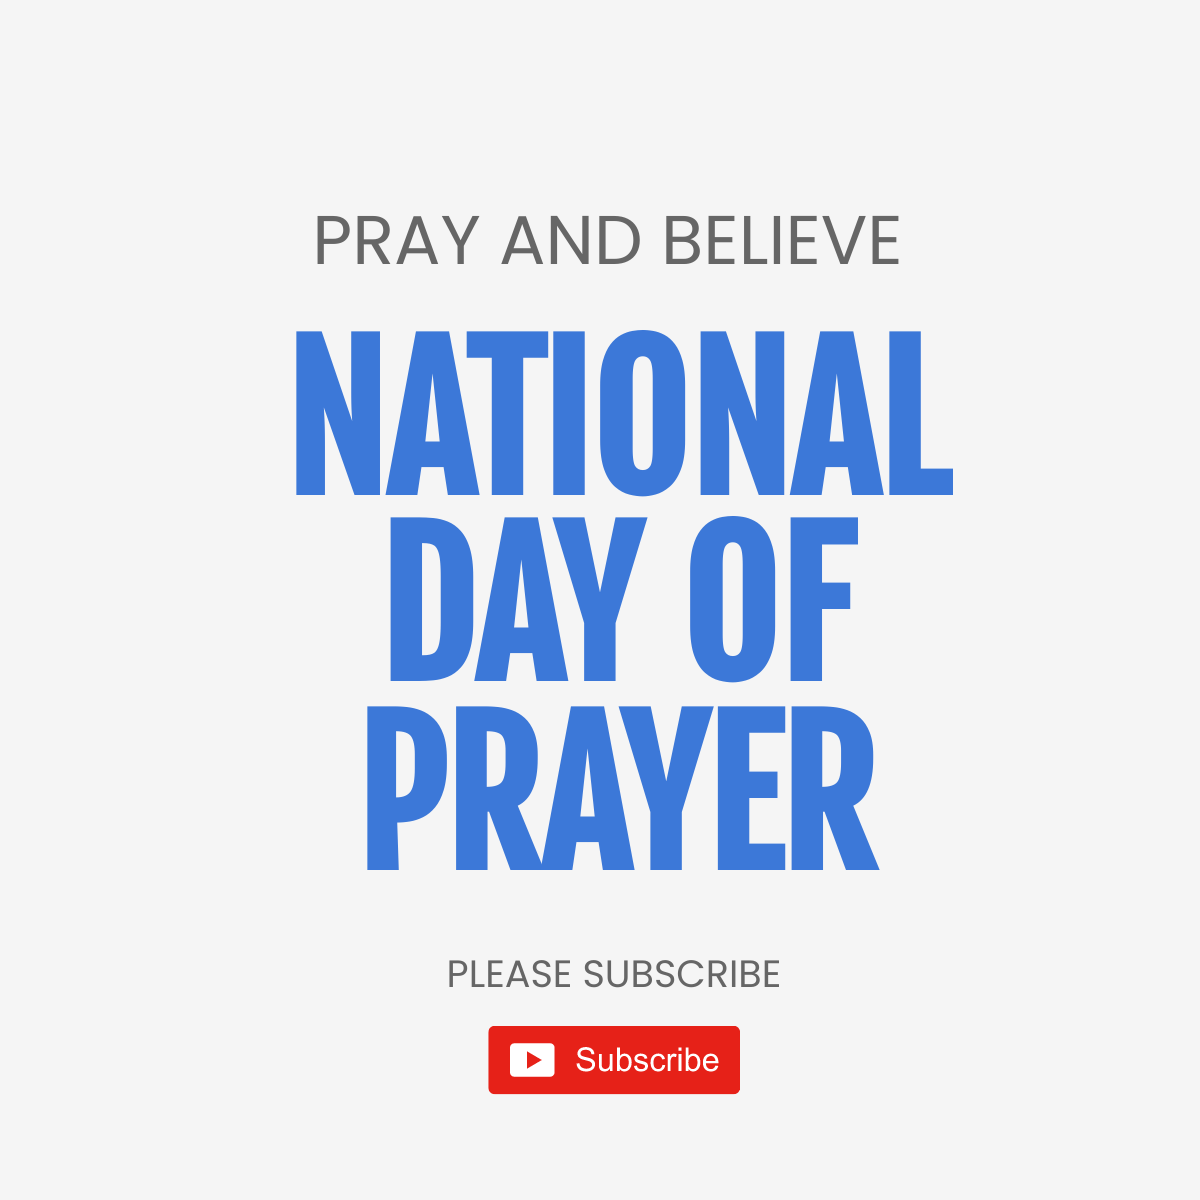 National Day of Prayer YouTube Profile Photo Template